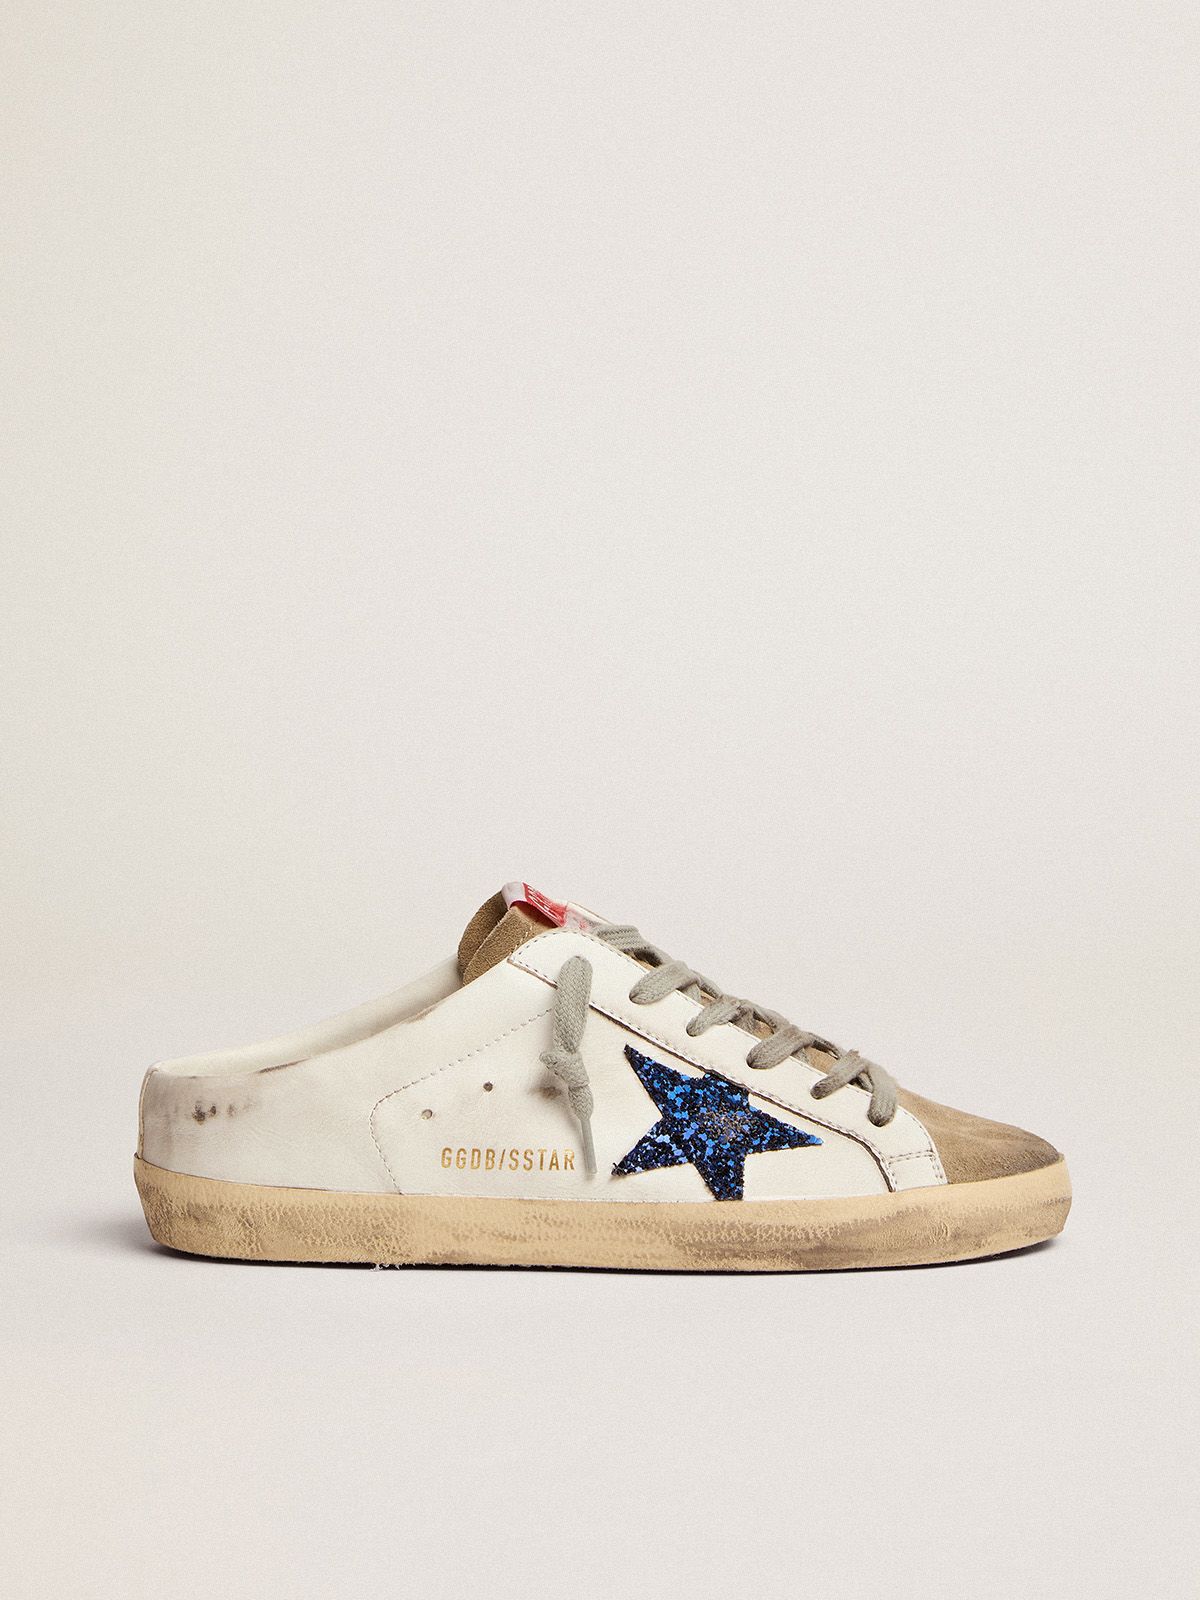 golden goose Sabots leather glitter in white dove-gray with and Super-Star star tongue blue suede